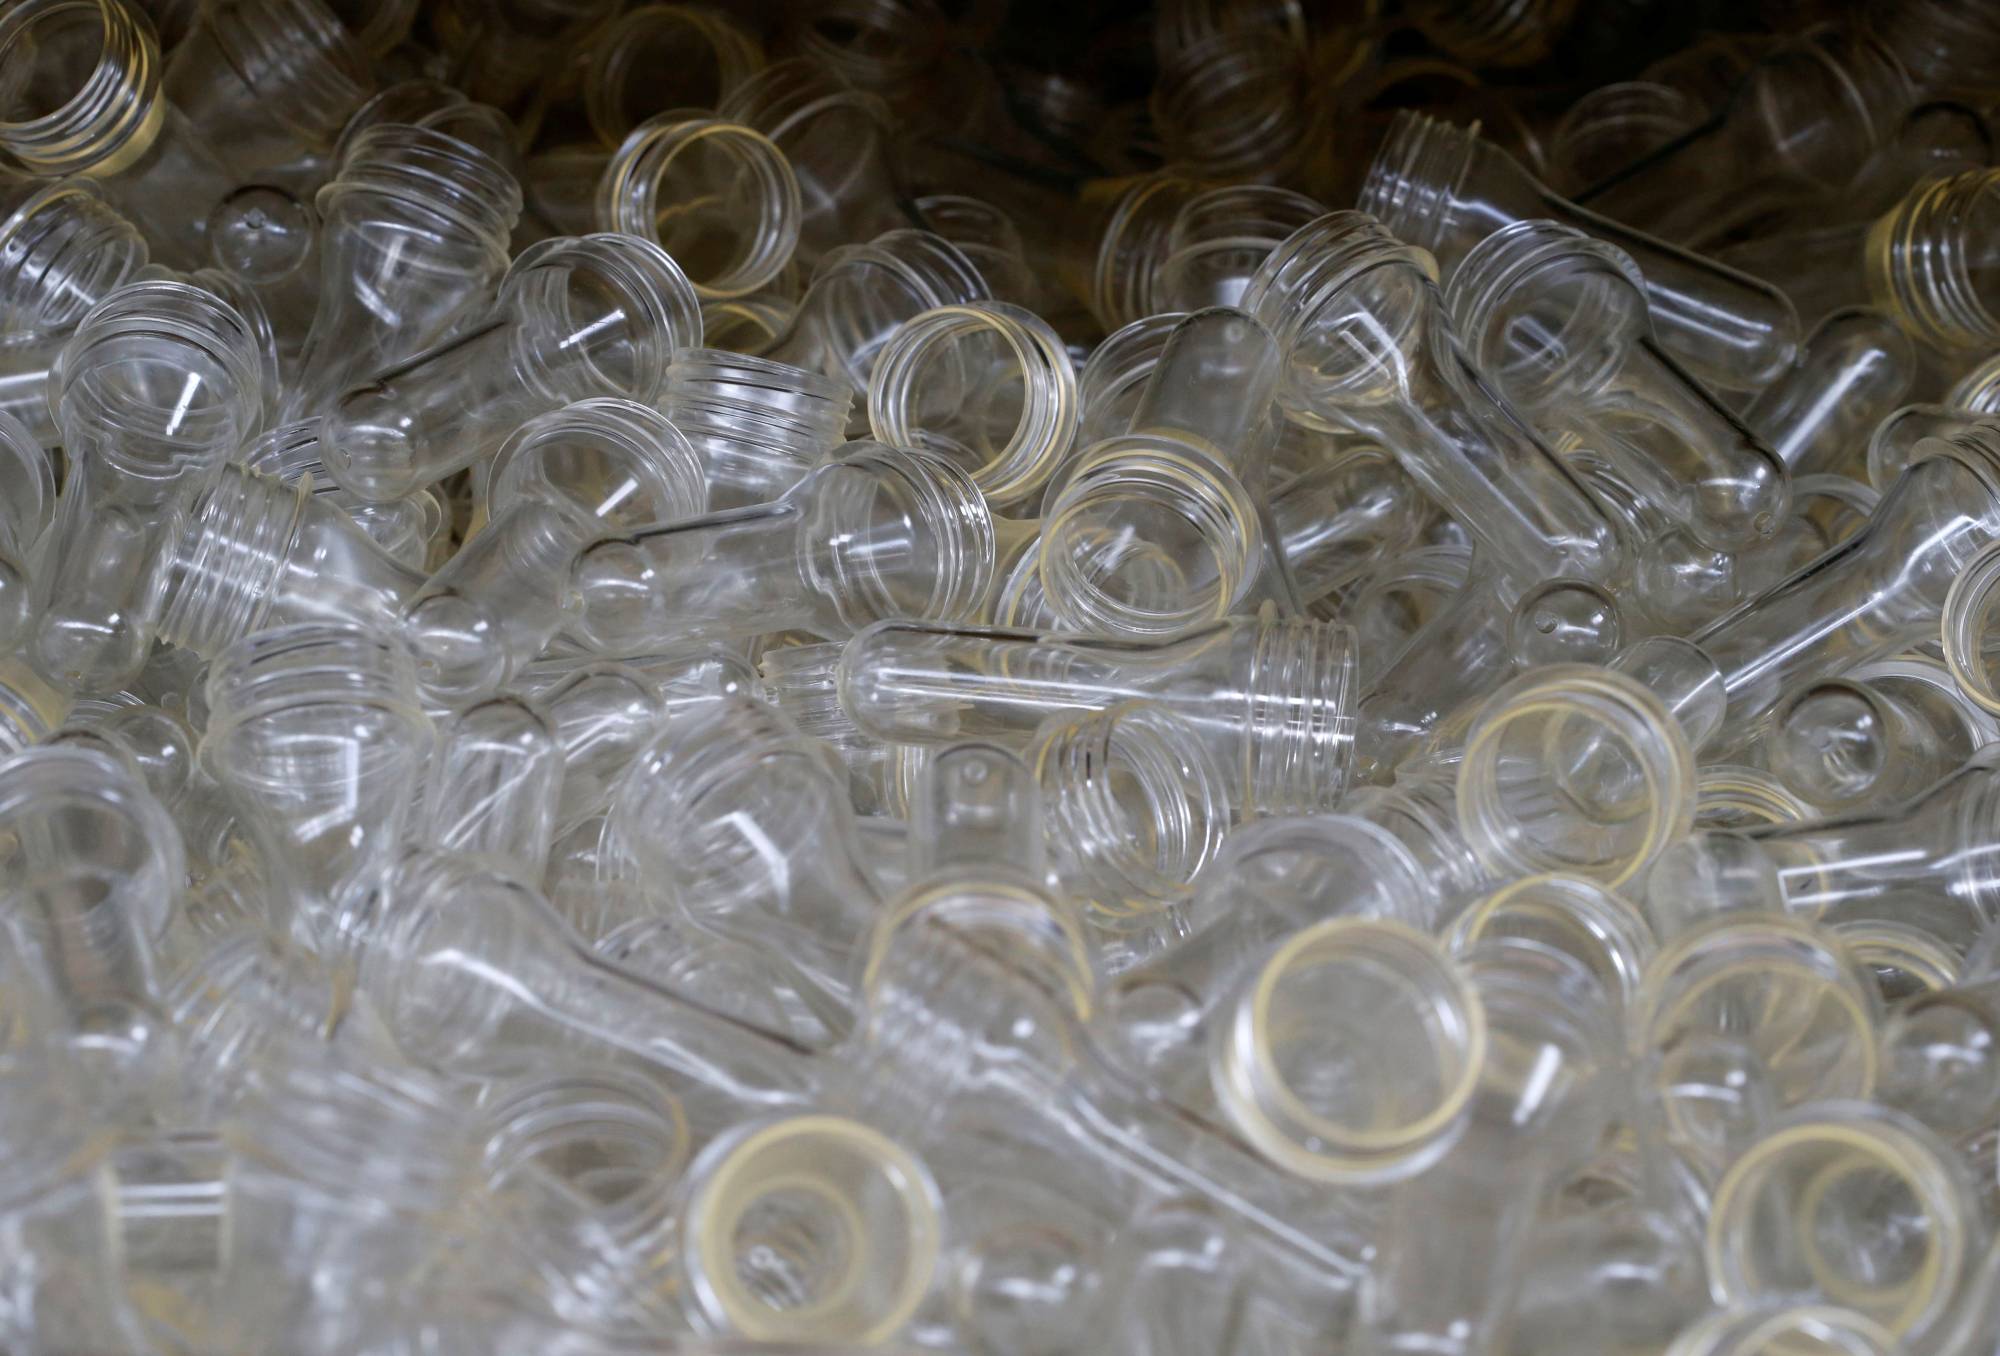 VeganBottles with zero oil are 100% biodegradable, compostable and are made from sugar cane. This batch is seen on the production line at the Lyspackaging factory in Saintes, France, in 2018. | REUTERS